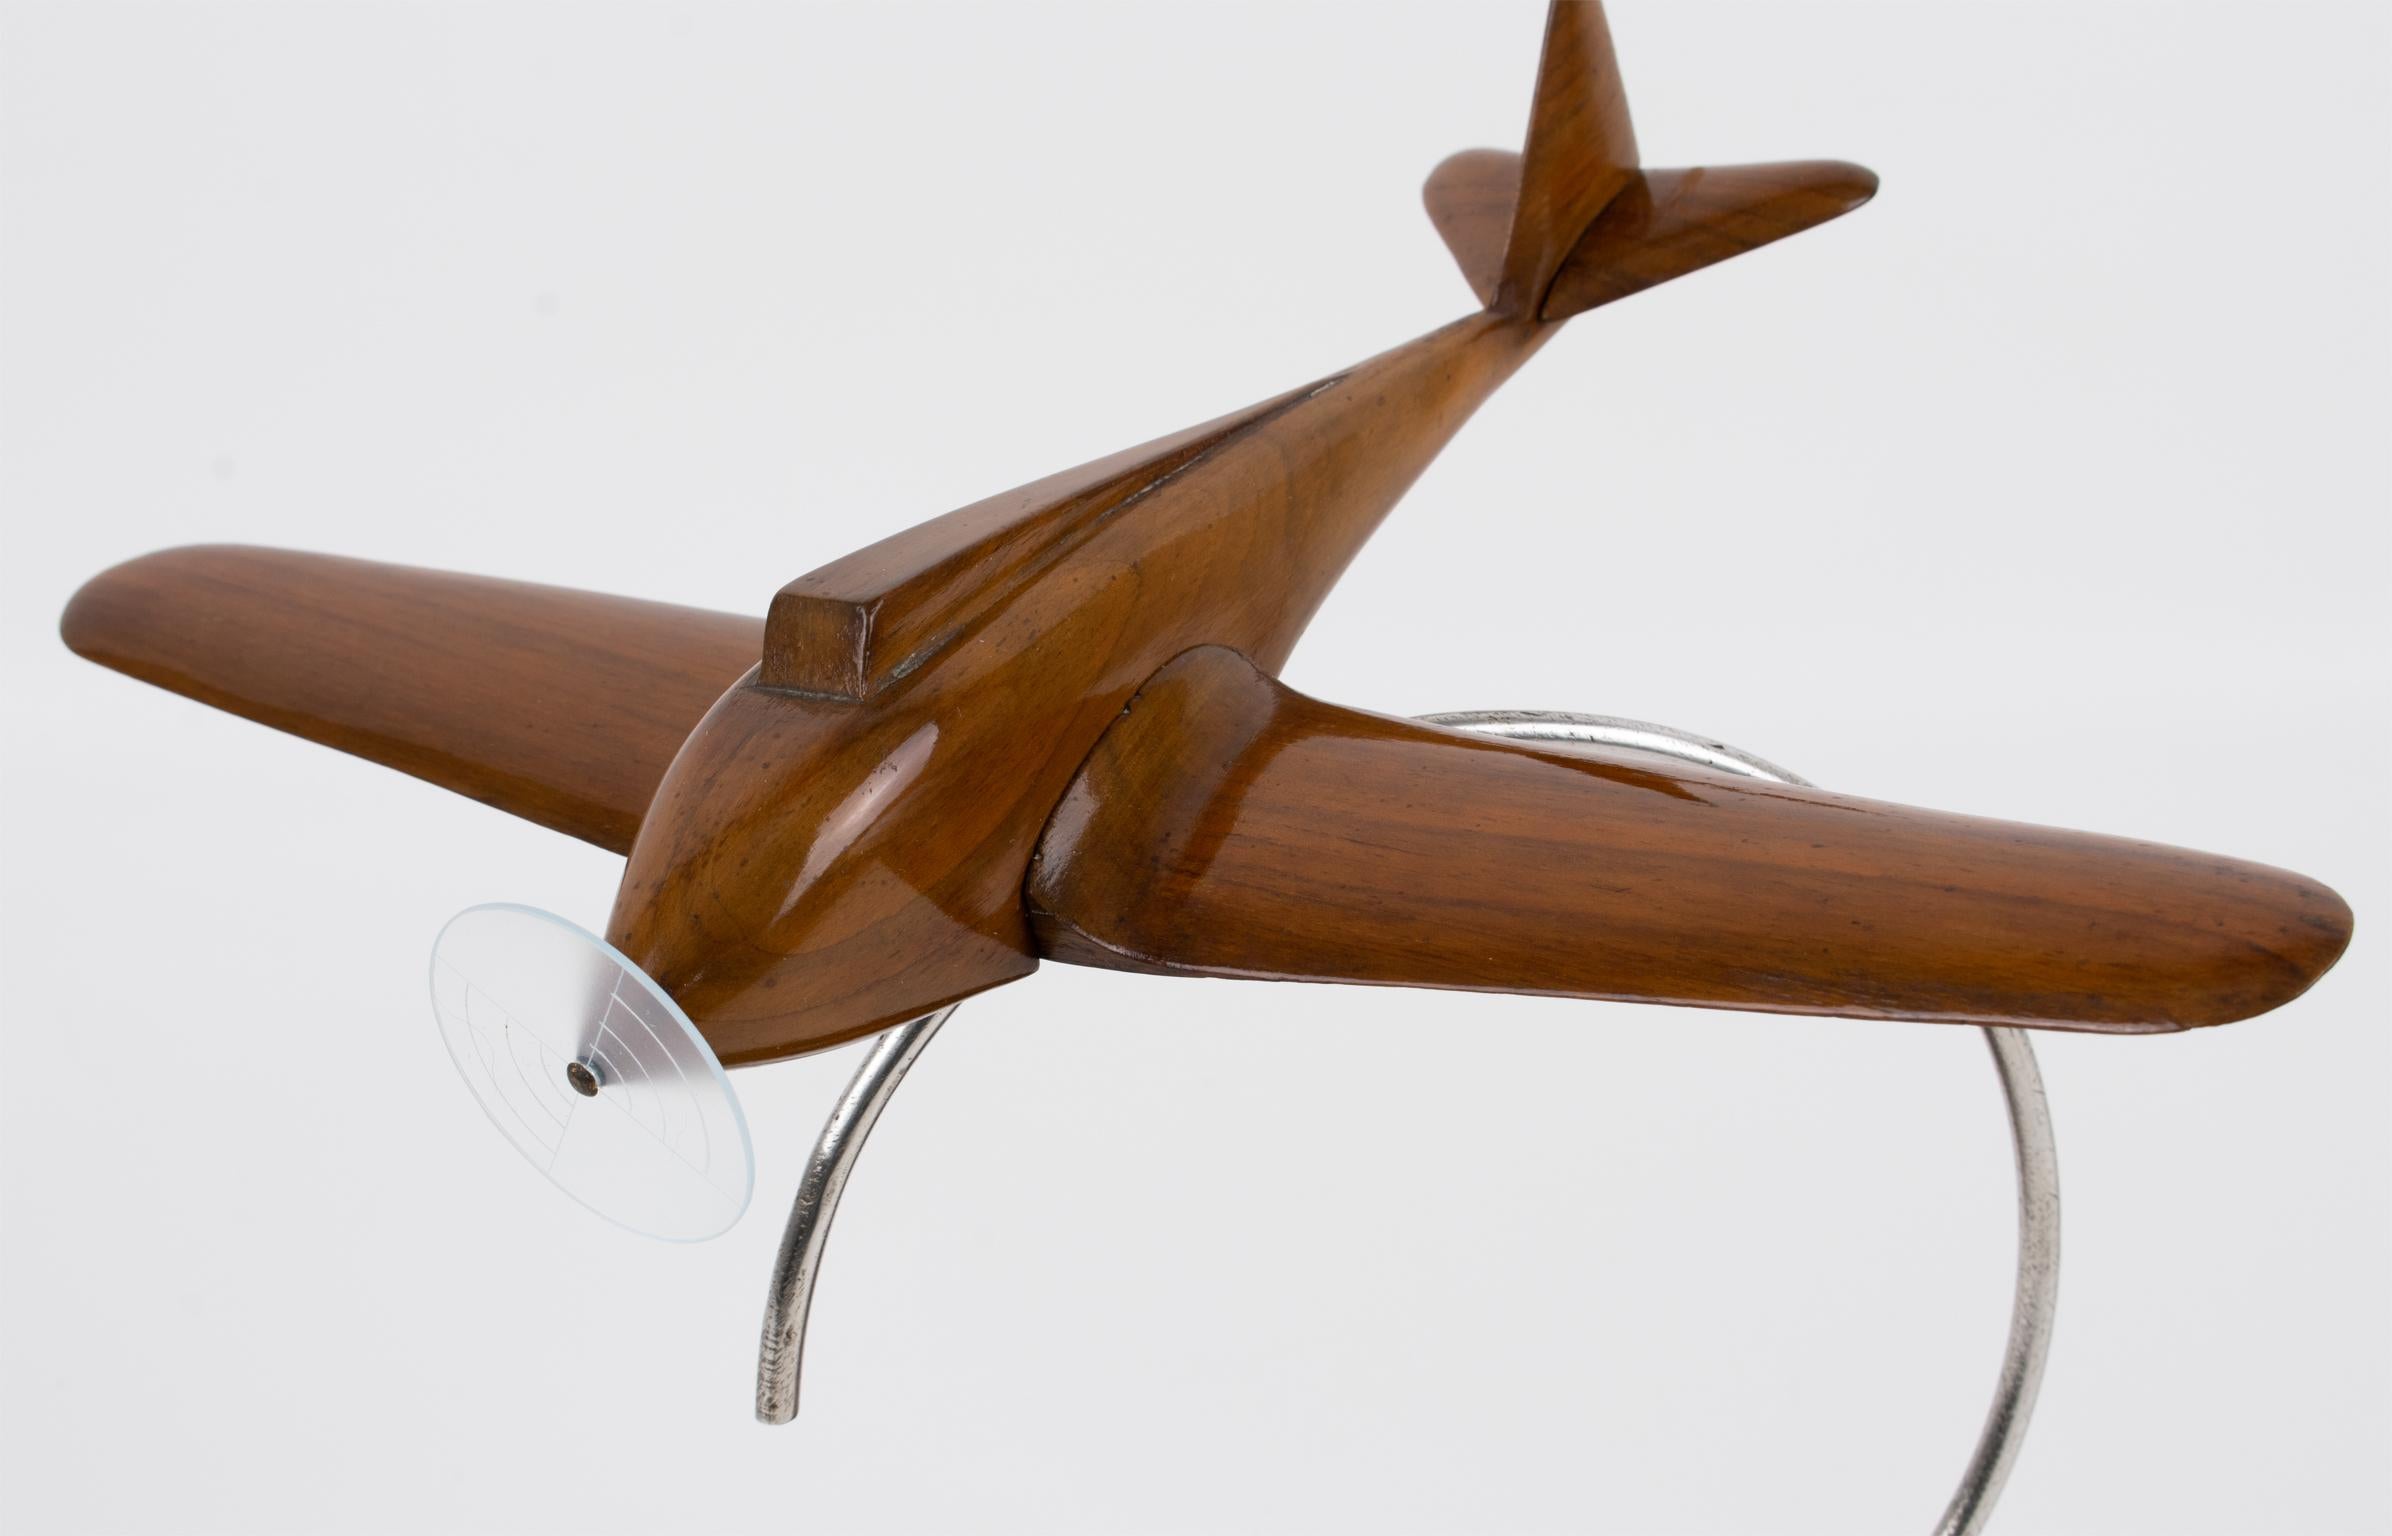 Art Deco Wood and Metal Airplane Aviation Propeller Model, France 1930s For Sale 3